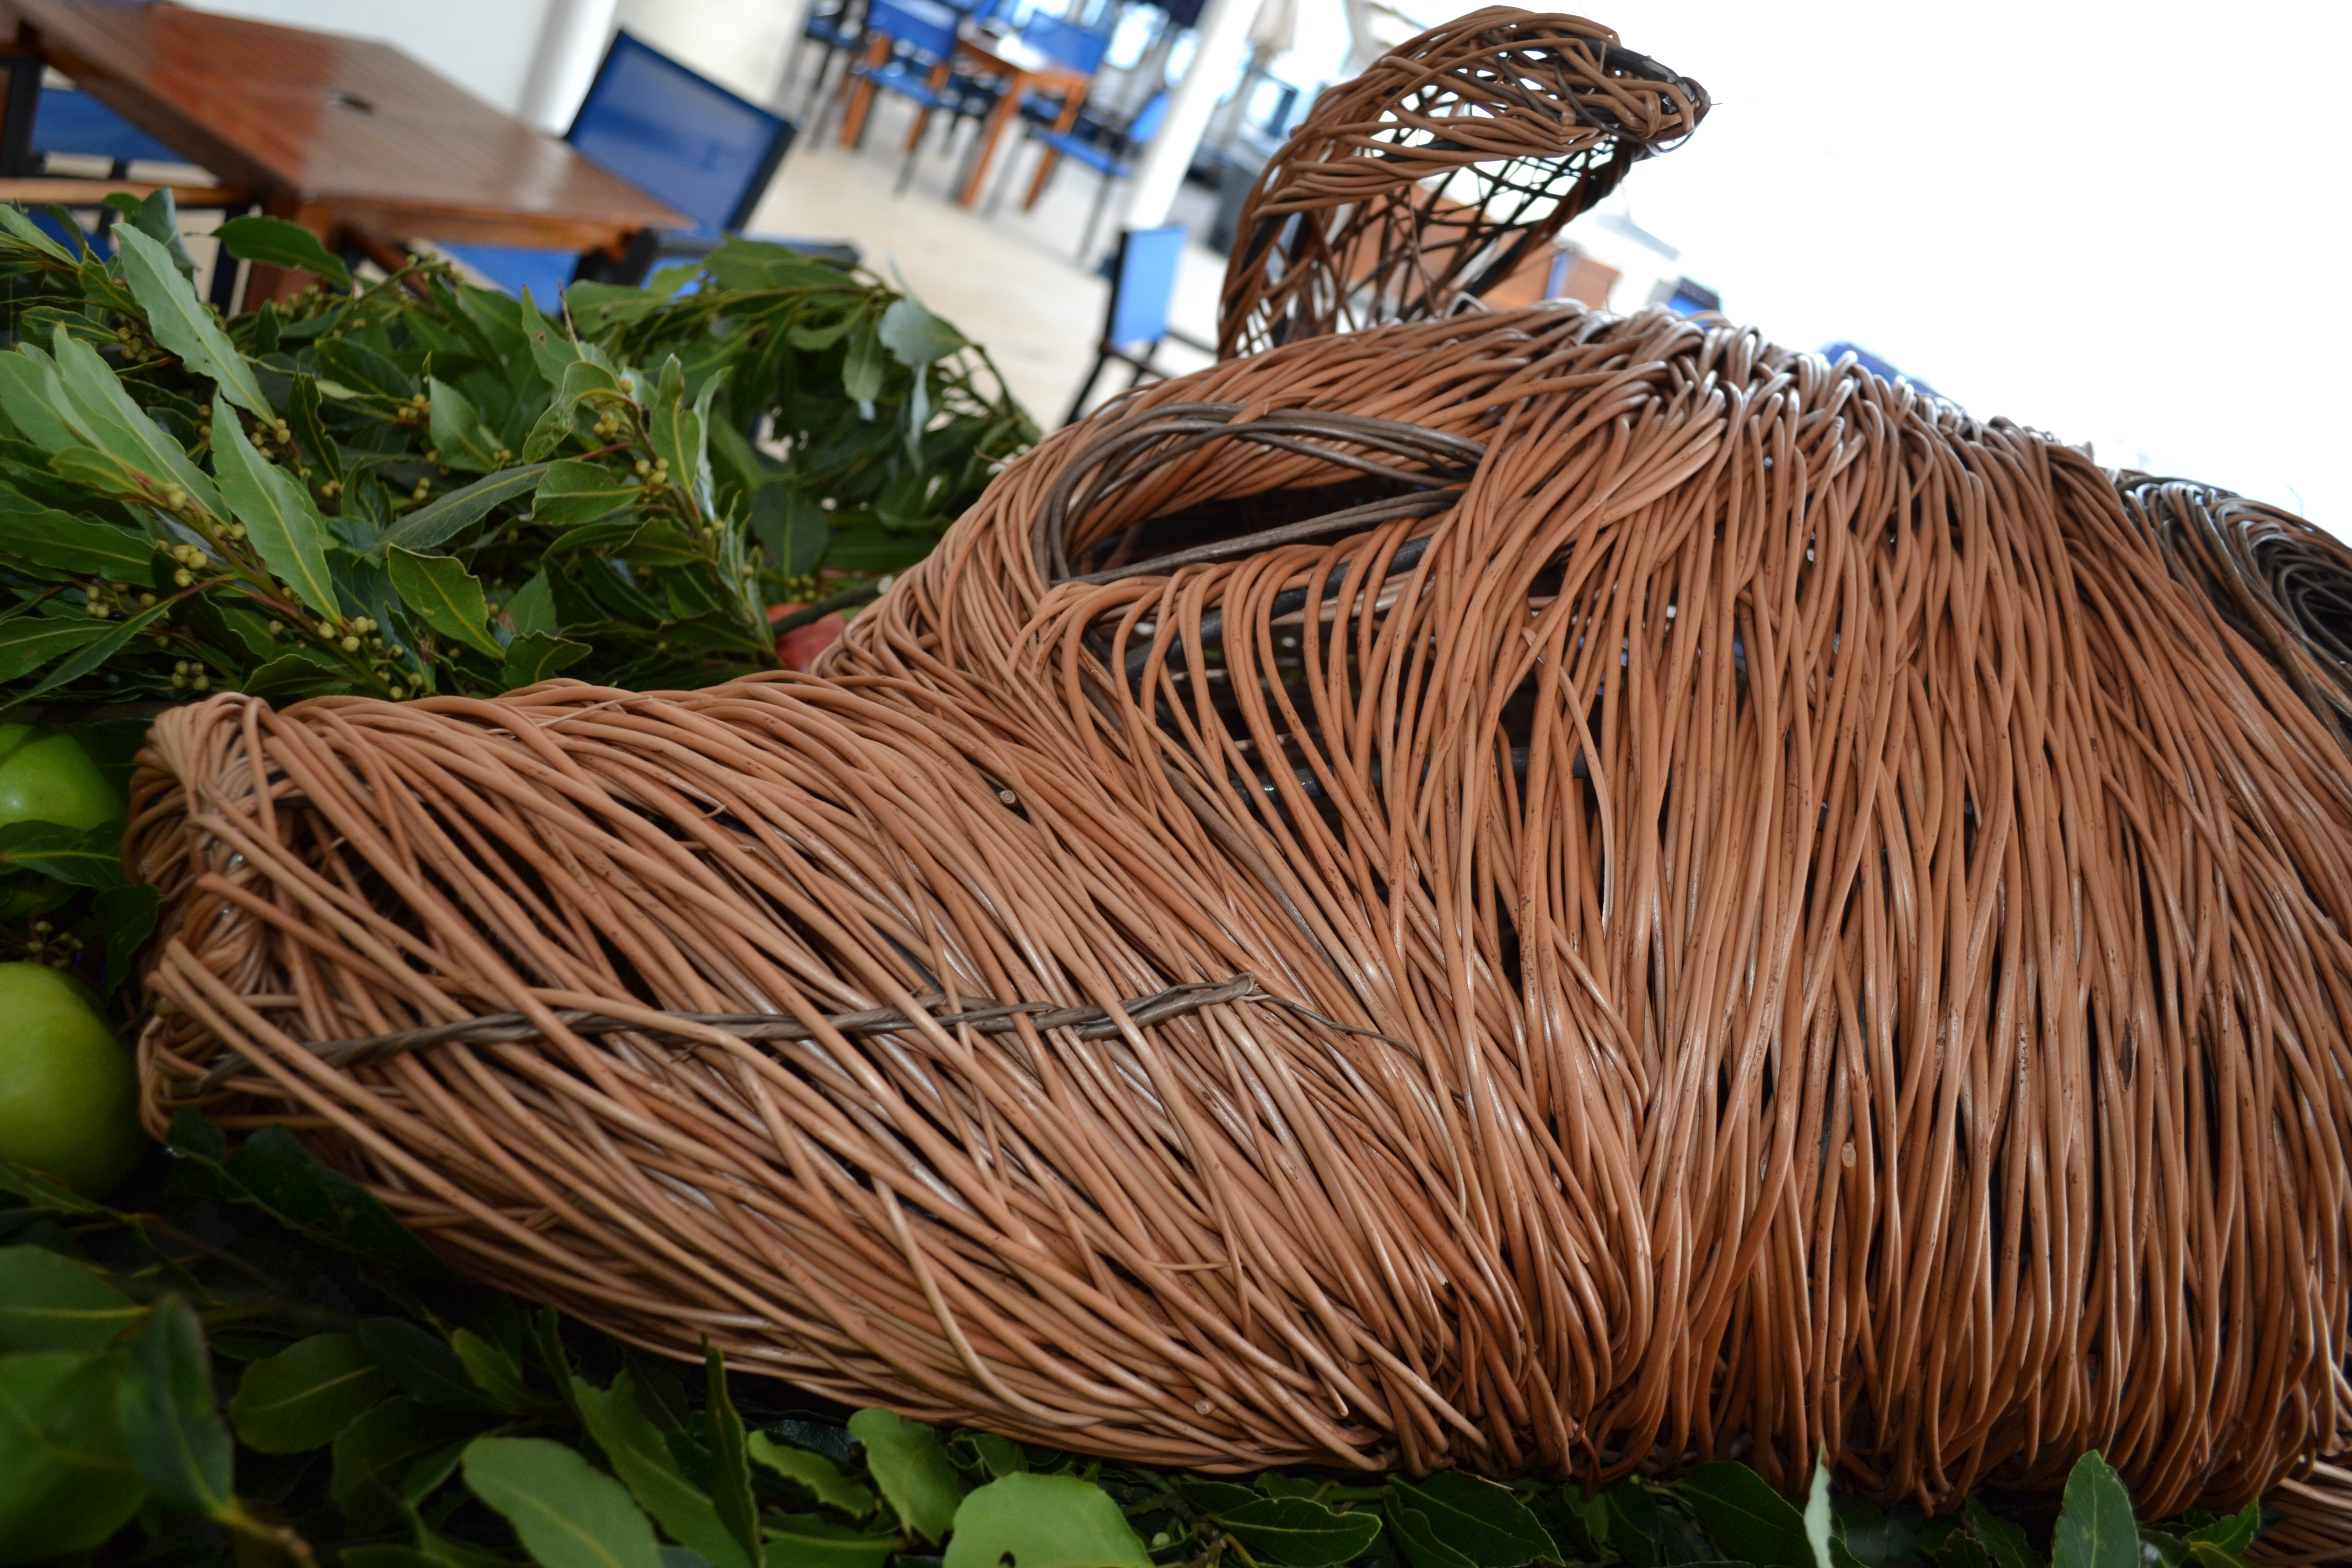 wicker pig on cruise ship